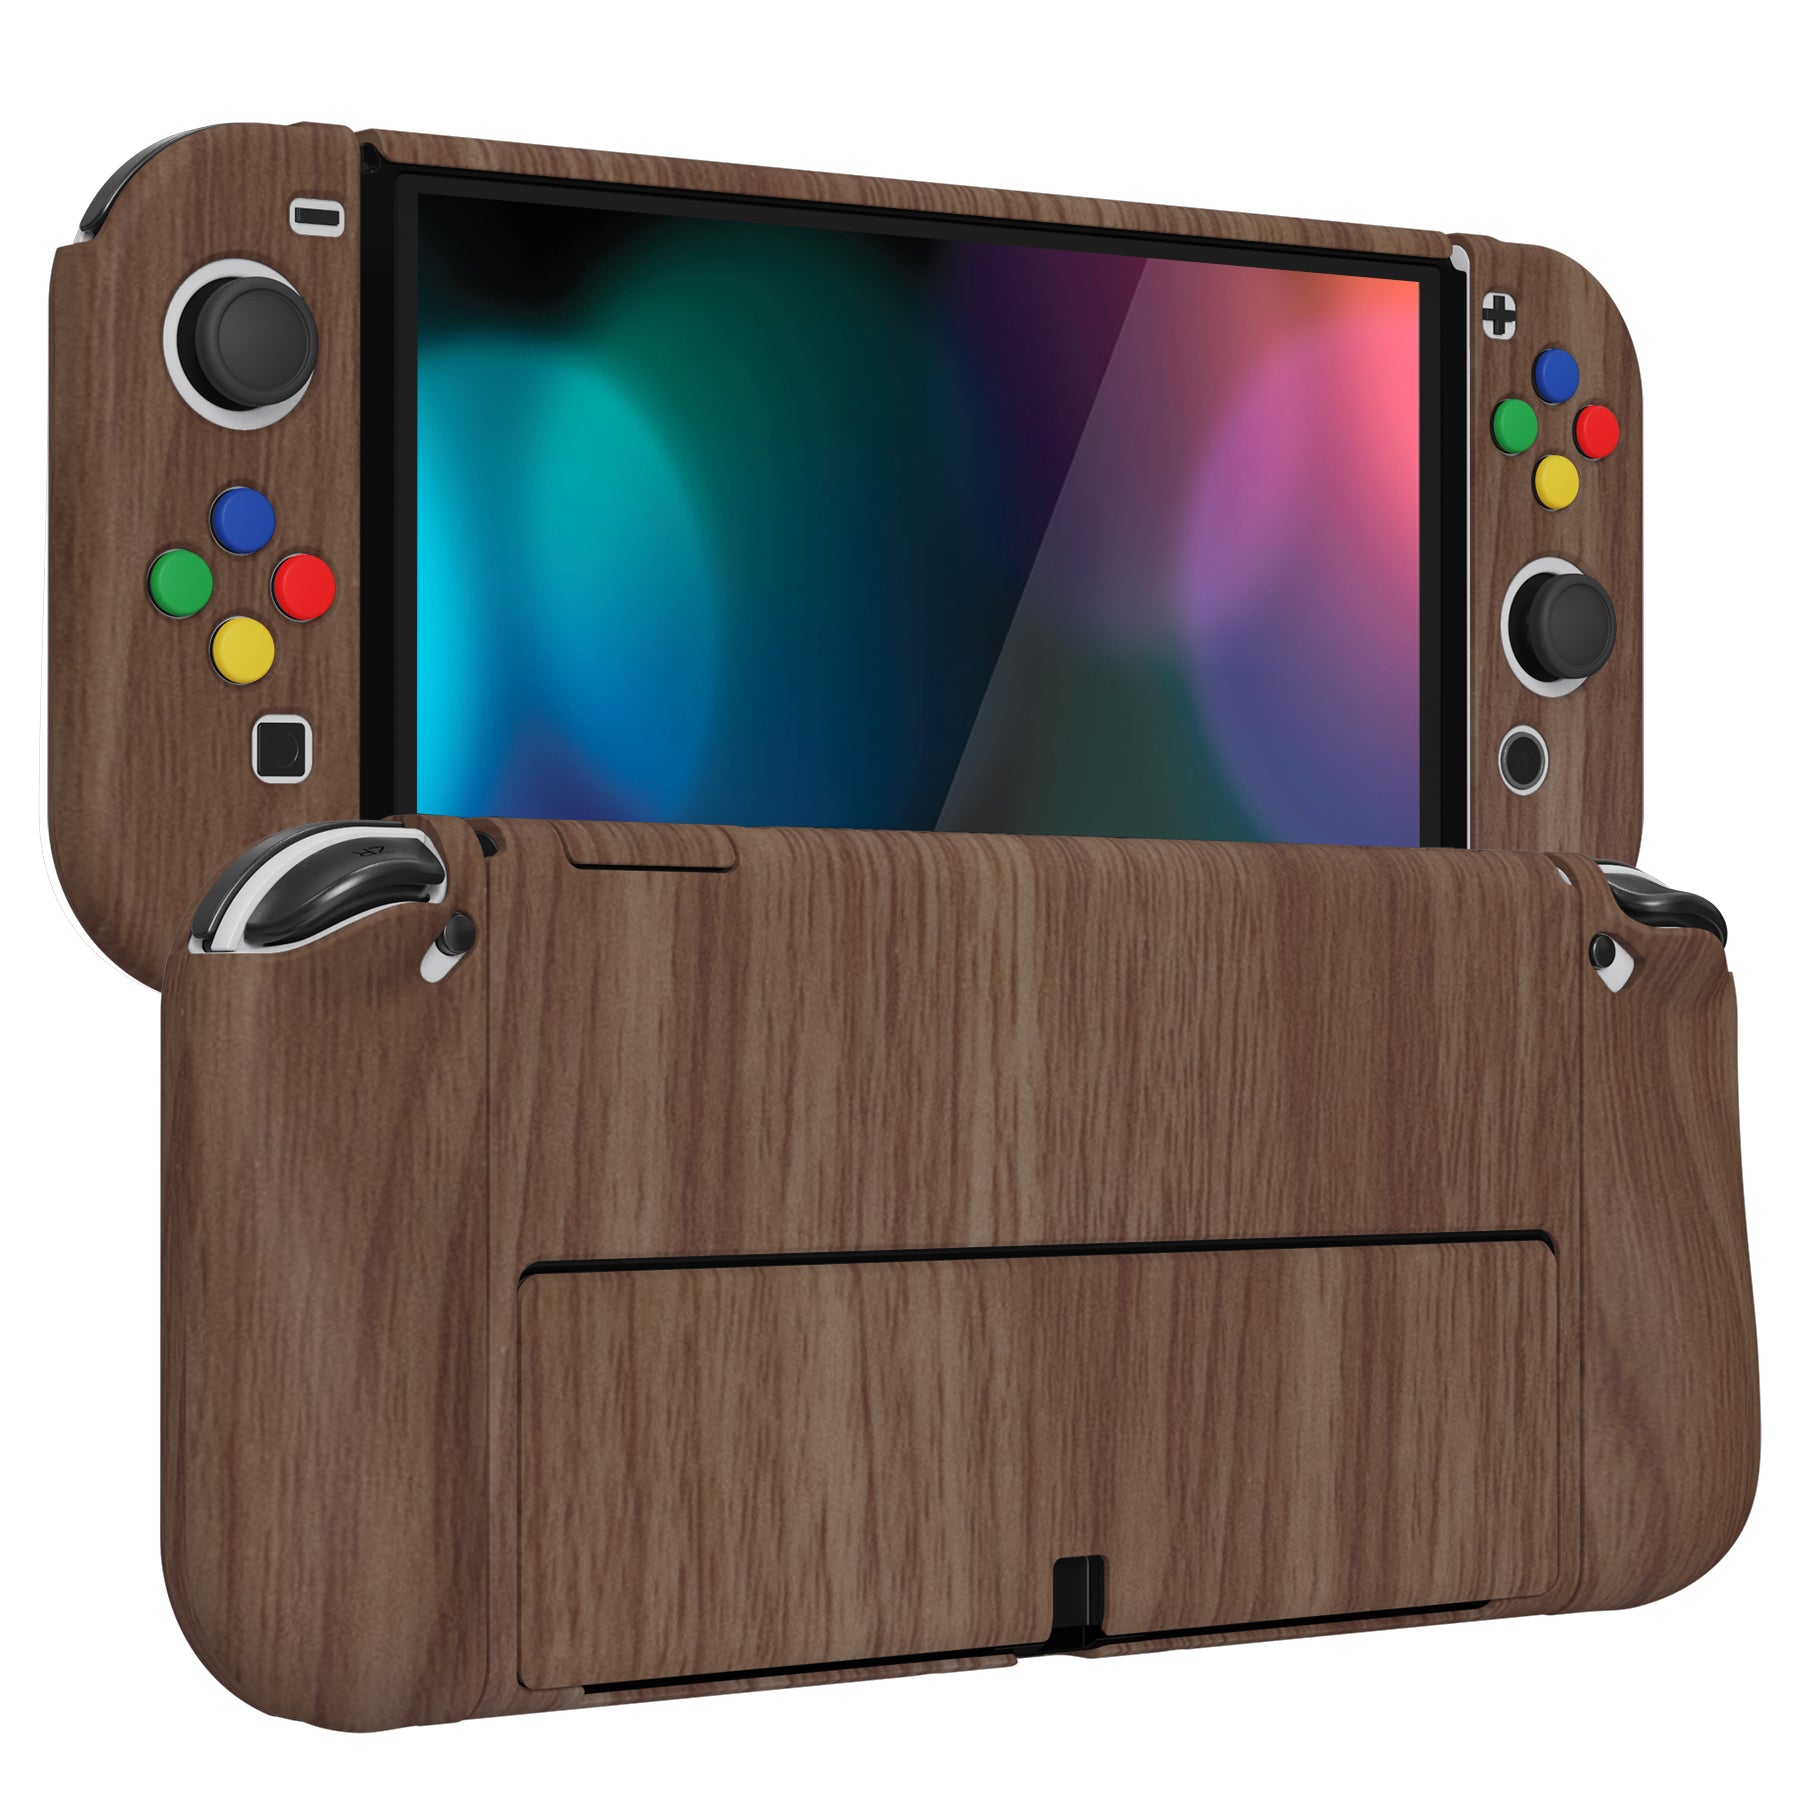 PlayVital AlterGrips Protective Slim Case for Nintendo Switch OLED, Ergonomic Grip Cover for Joycon, Dockable Hard Shell for Switch OLED with Thumb Grip Caps & Button Caps - Wood Grain - JSOYS2001 playvital